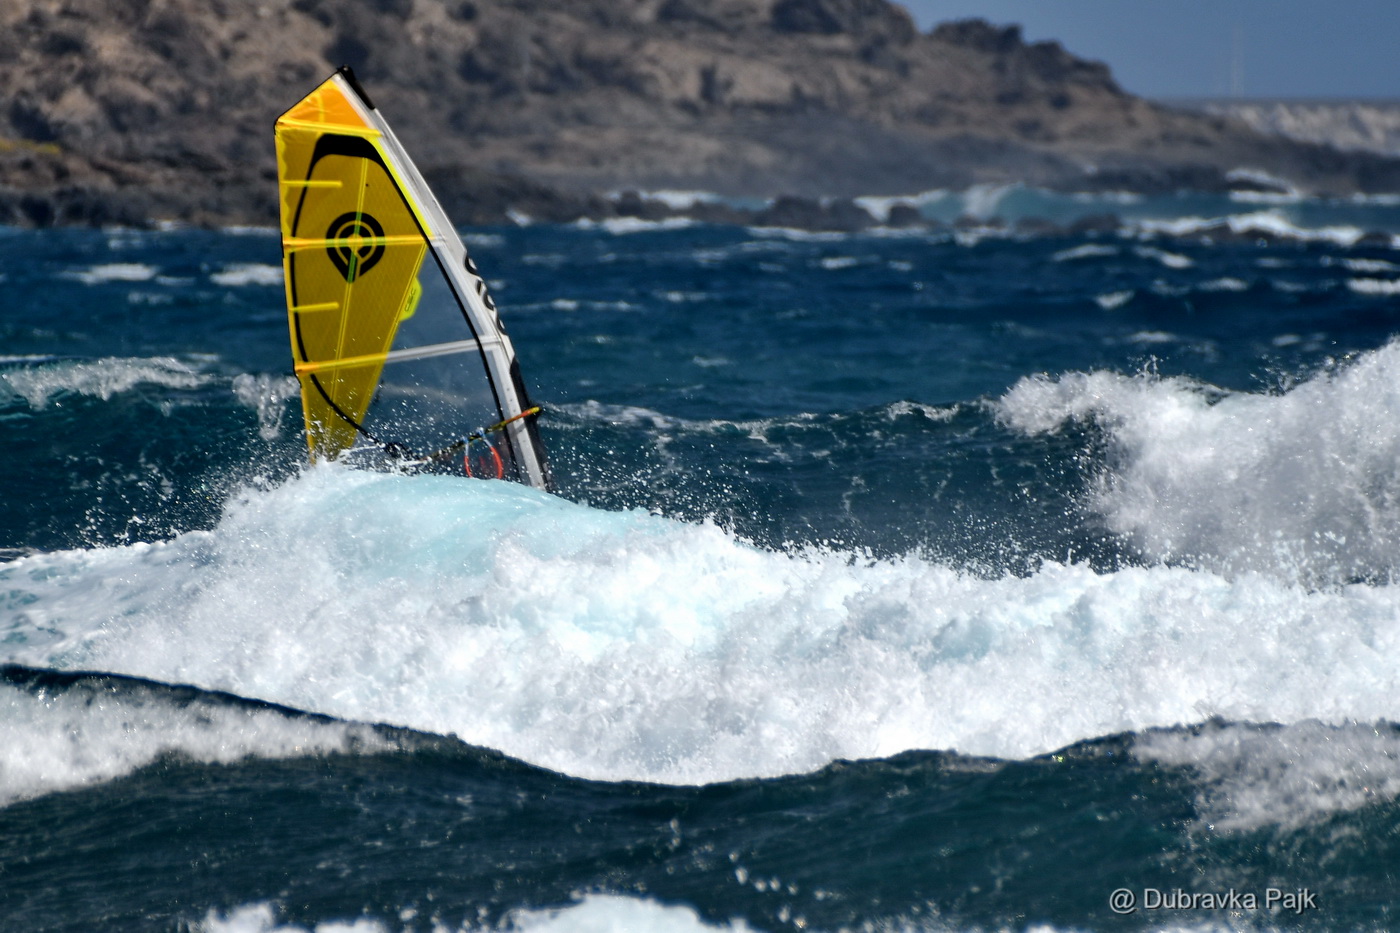 As long as you love what you are doing, why stop doing it? And I really love the ocean and windsurfing!